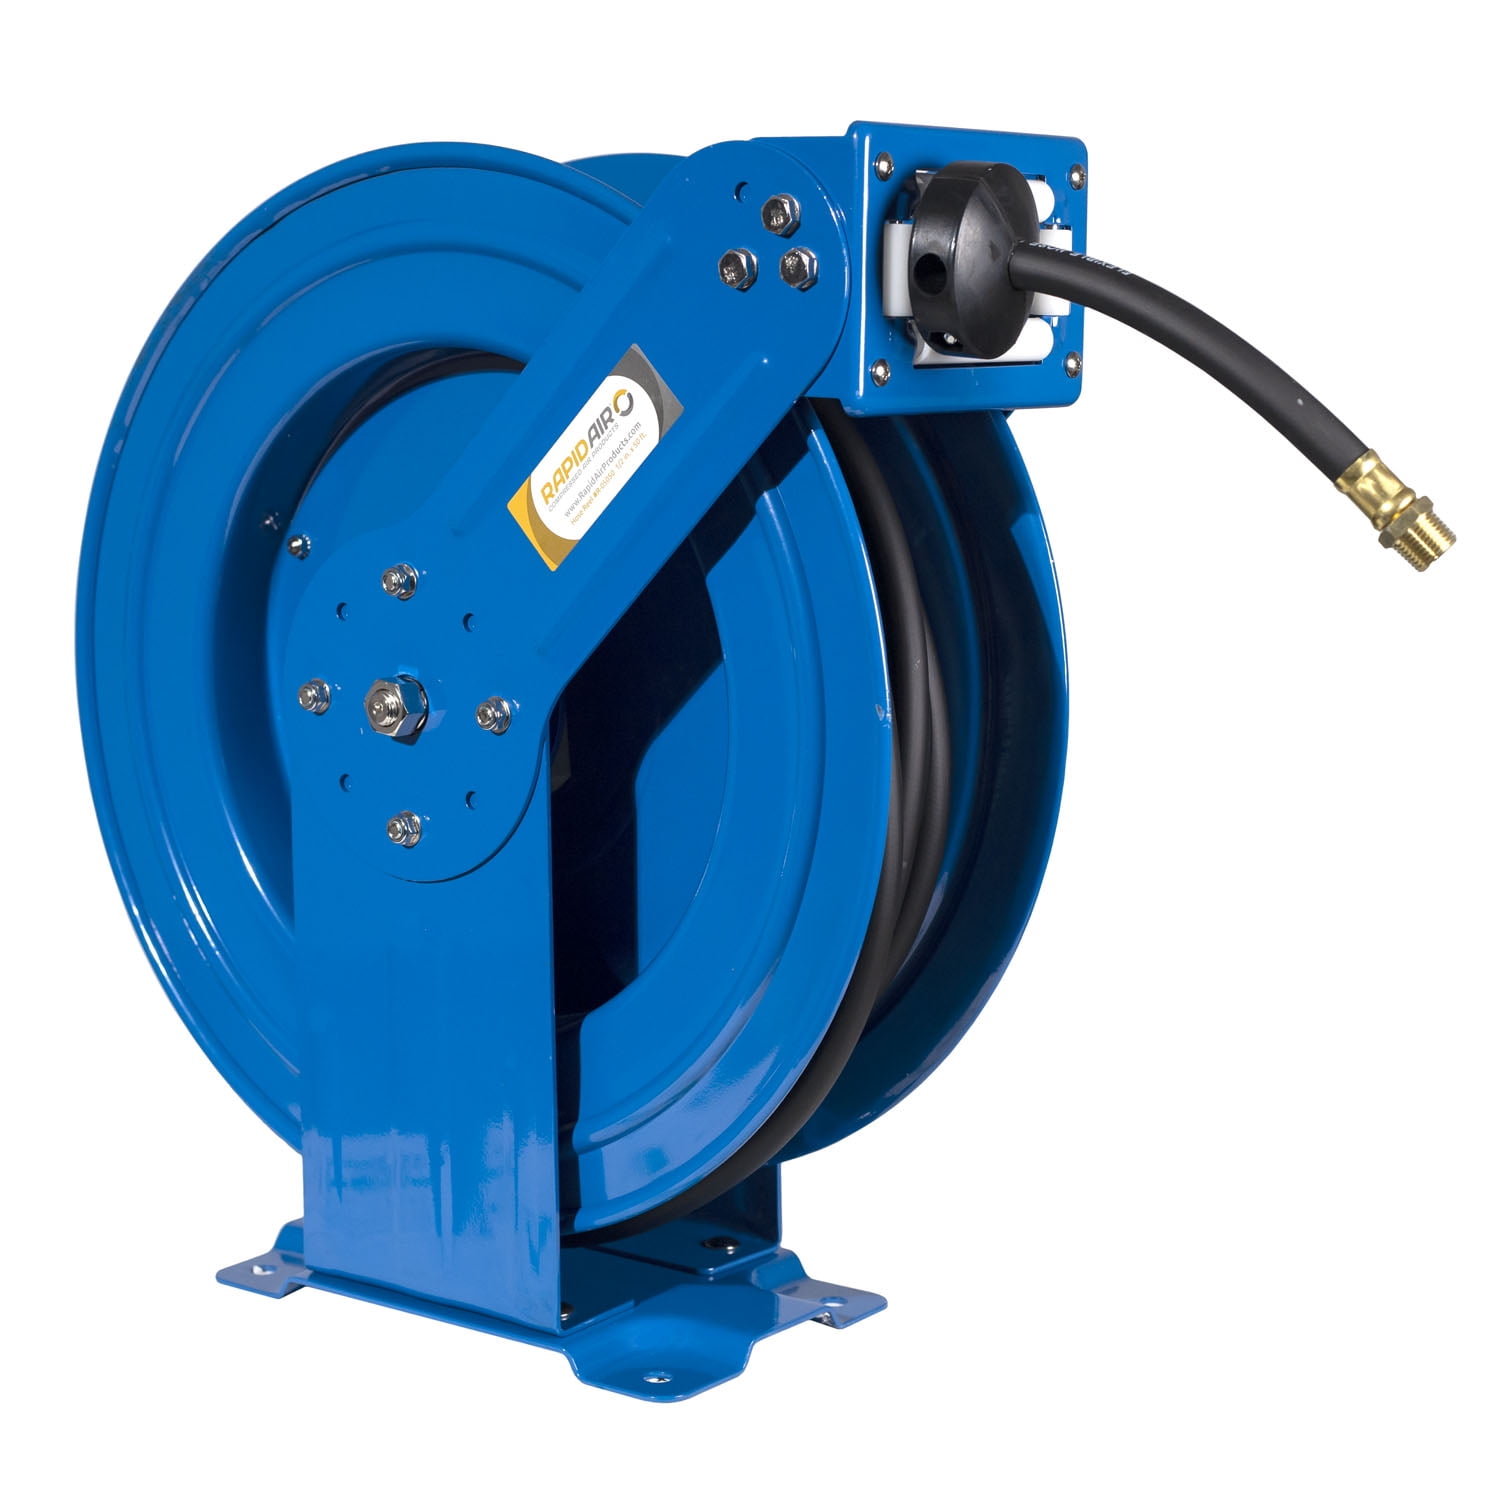 Rapidair 1/2 x 50' Dual Arm Steel Hose Reel 1/2 Inlet and Outlet R-05050  